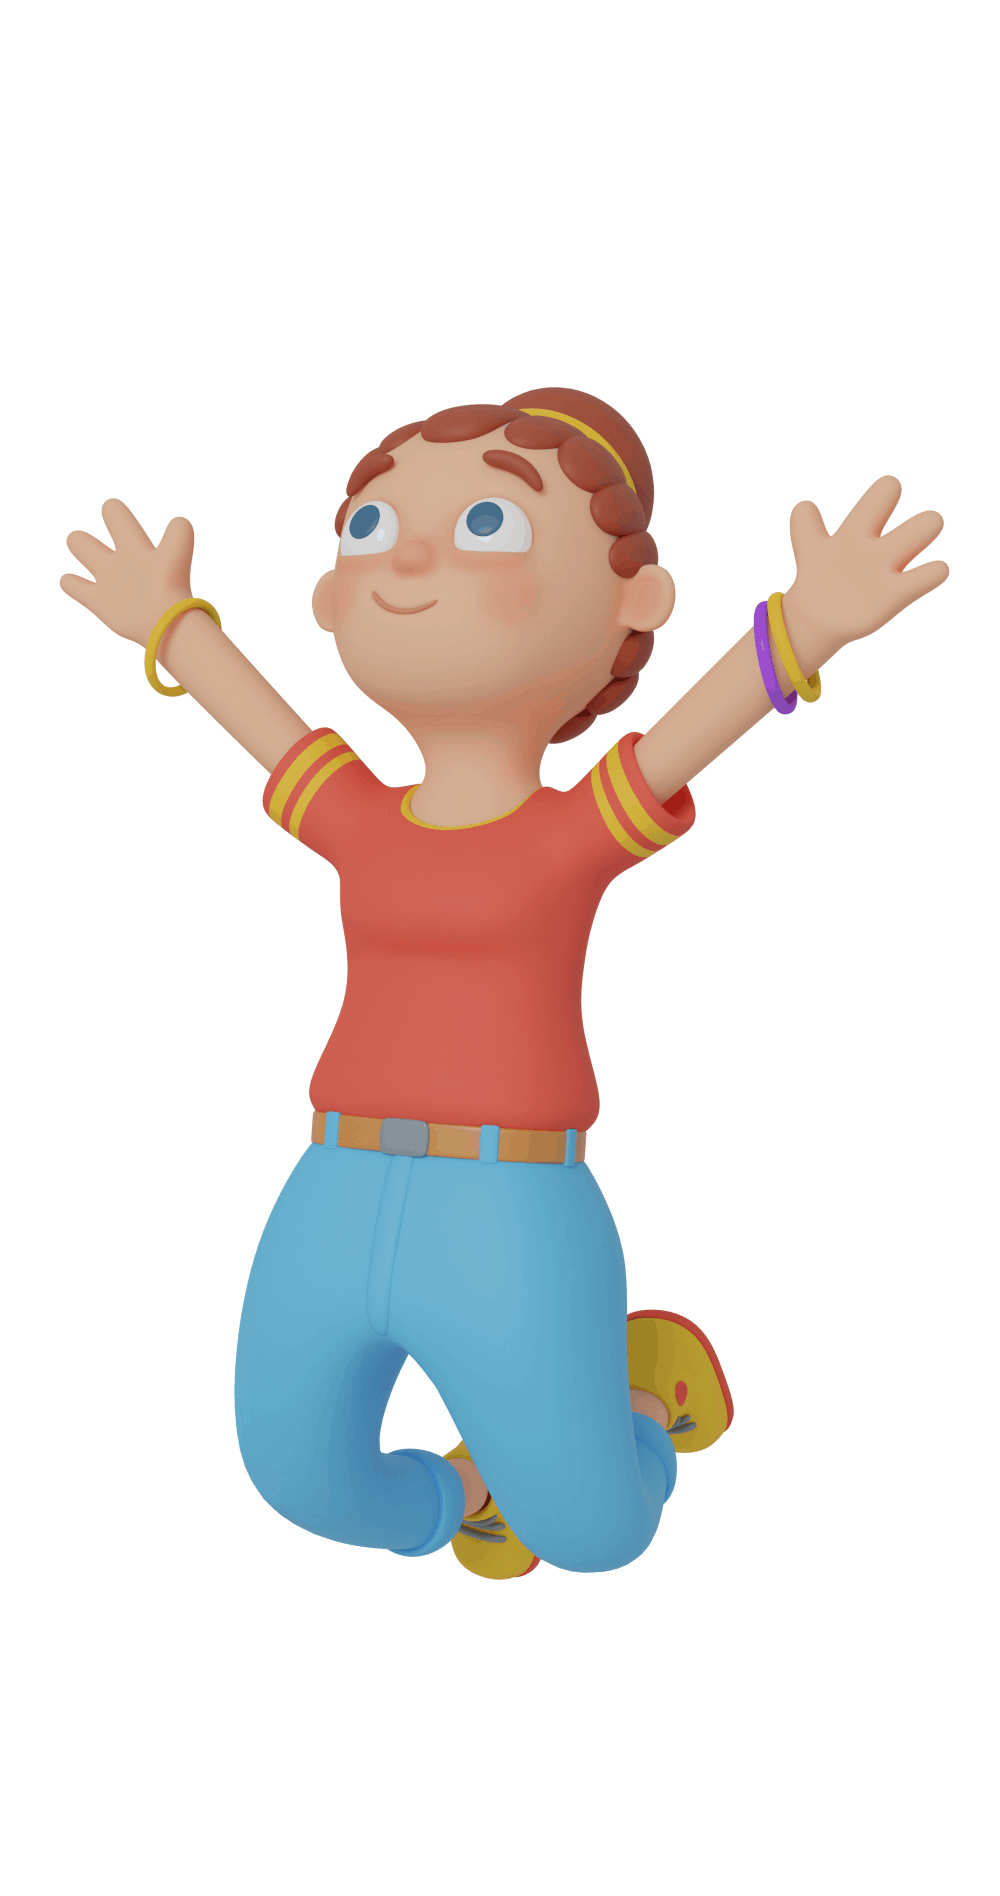 3d character design of a girl jumping with her arms up